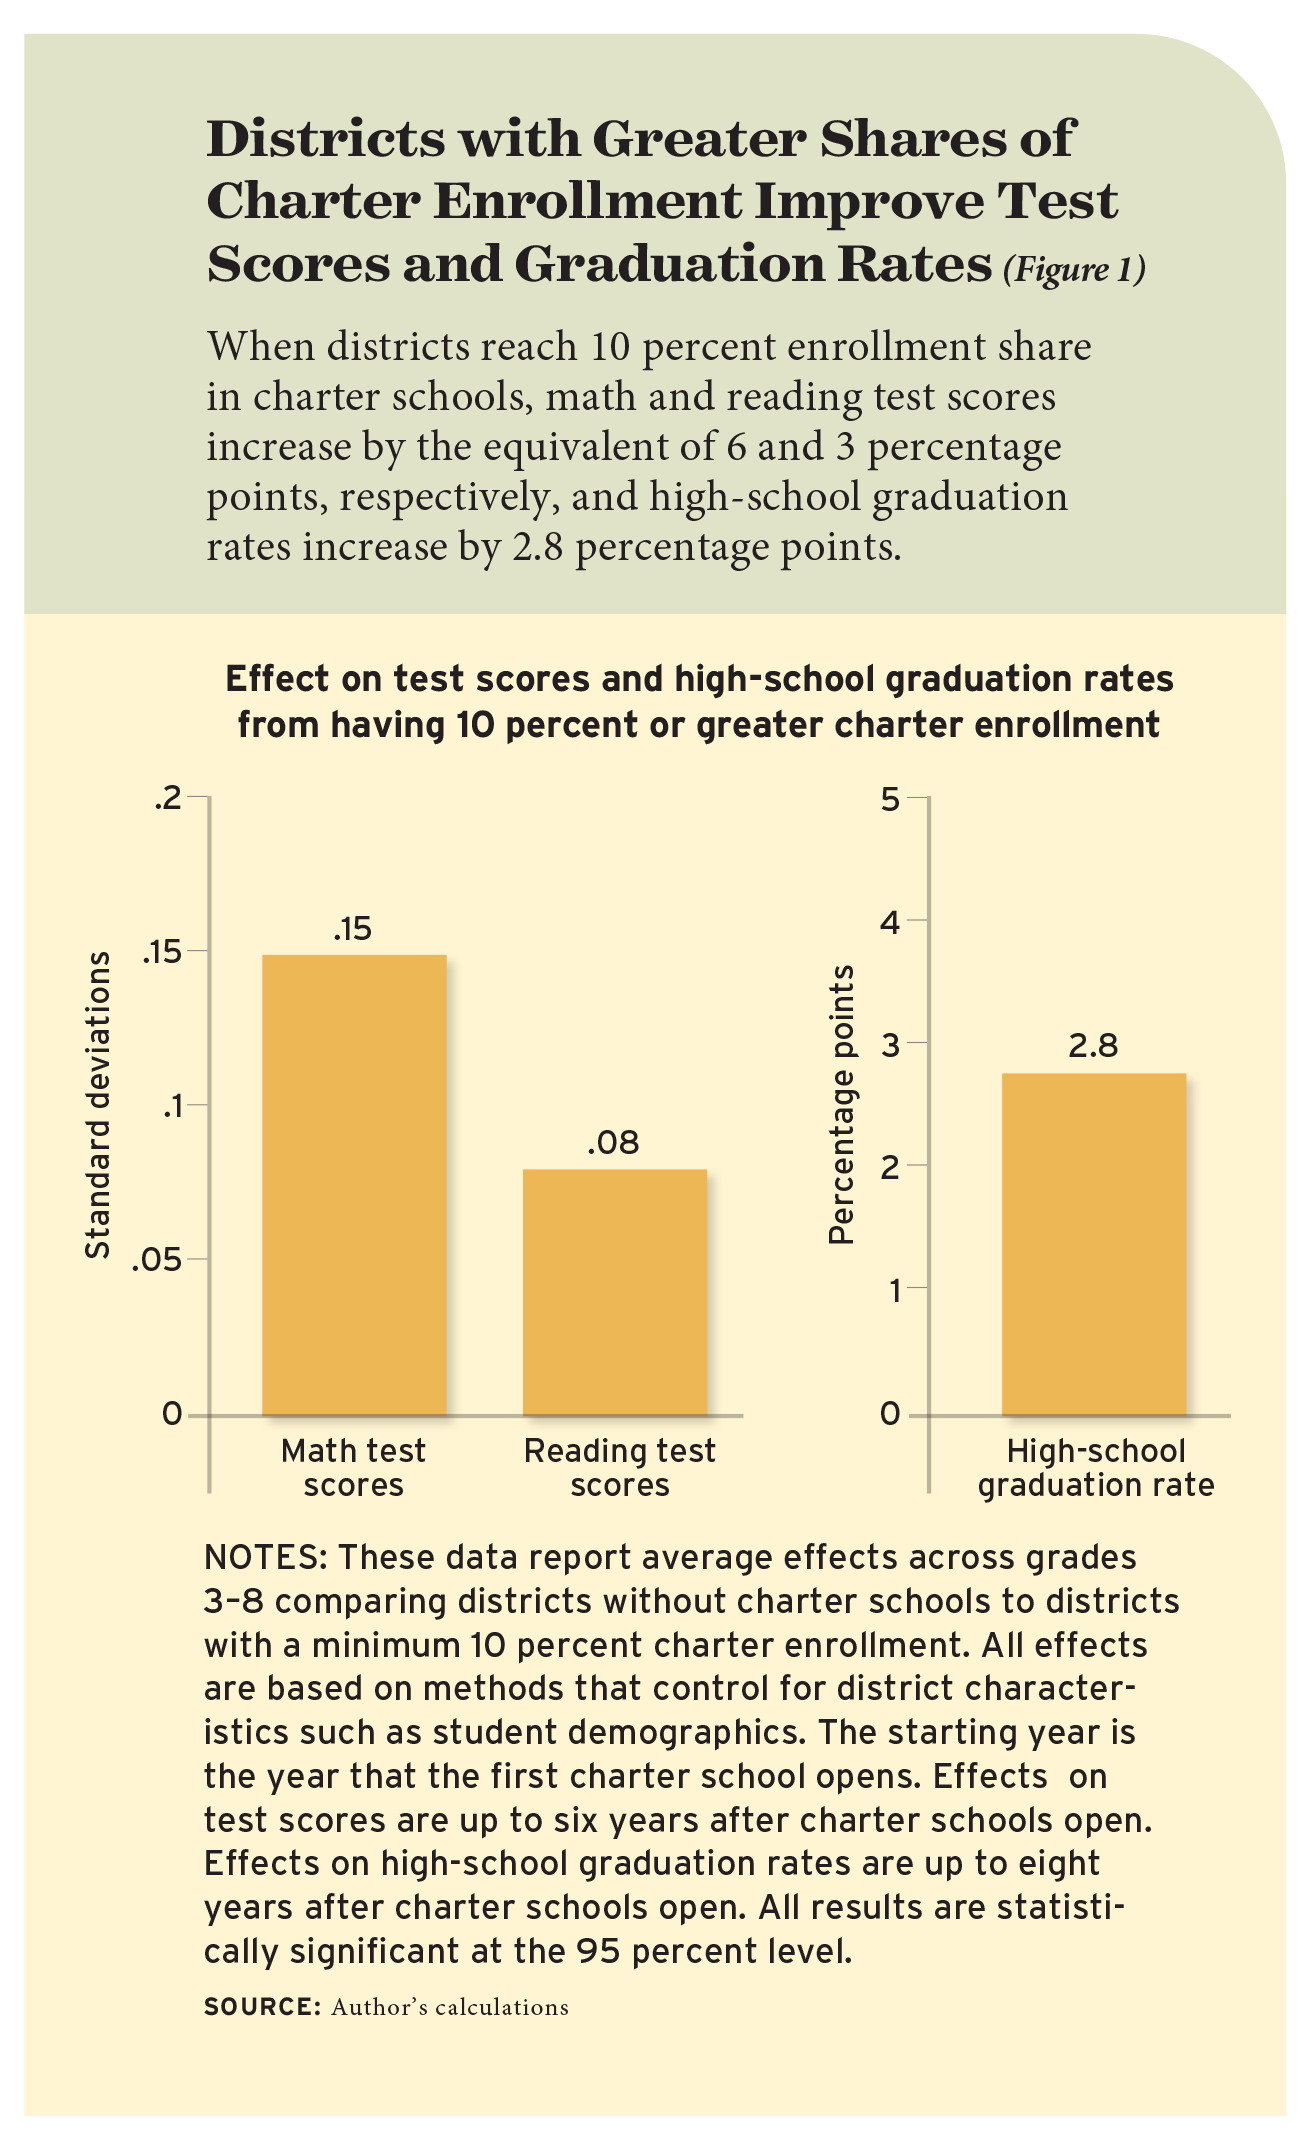 Districts with Greater Shares of Charter Enrollment Improve Test Scores and Graduation Rates (Figure 1)